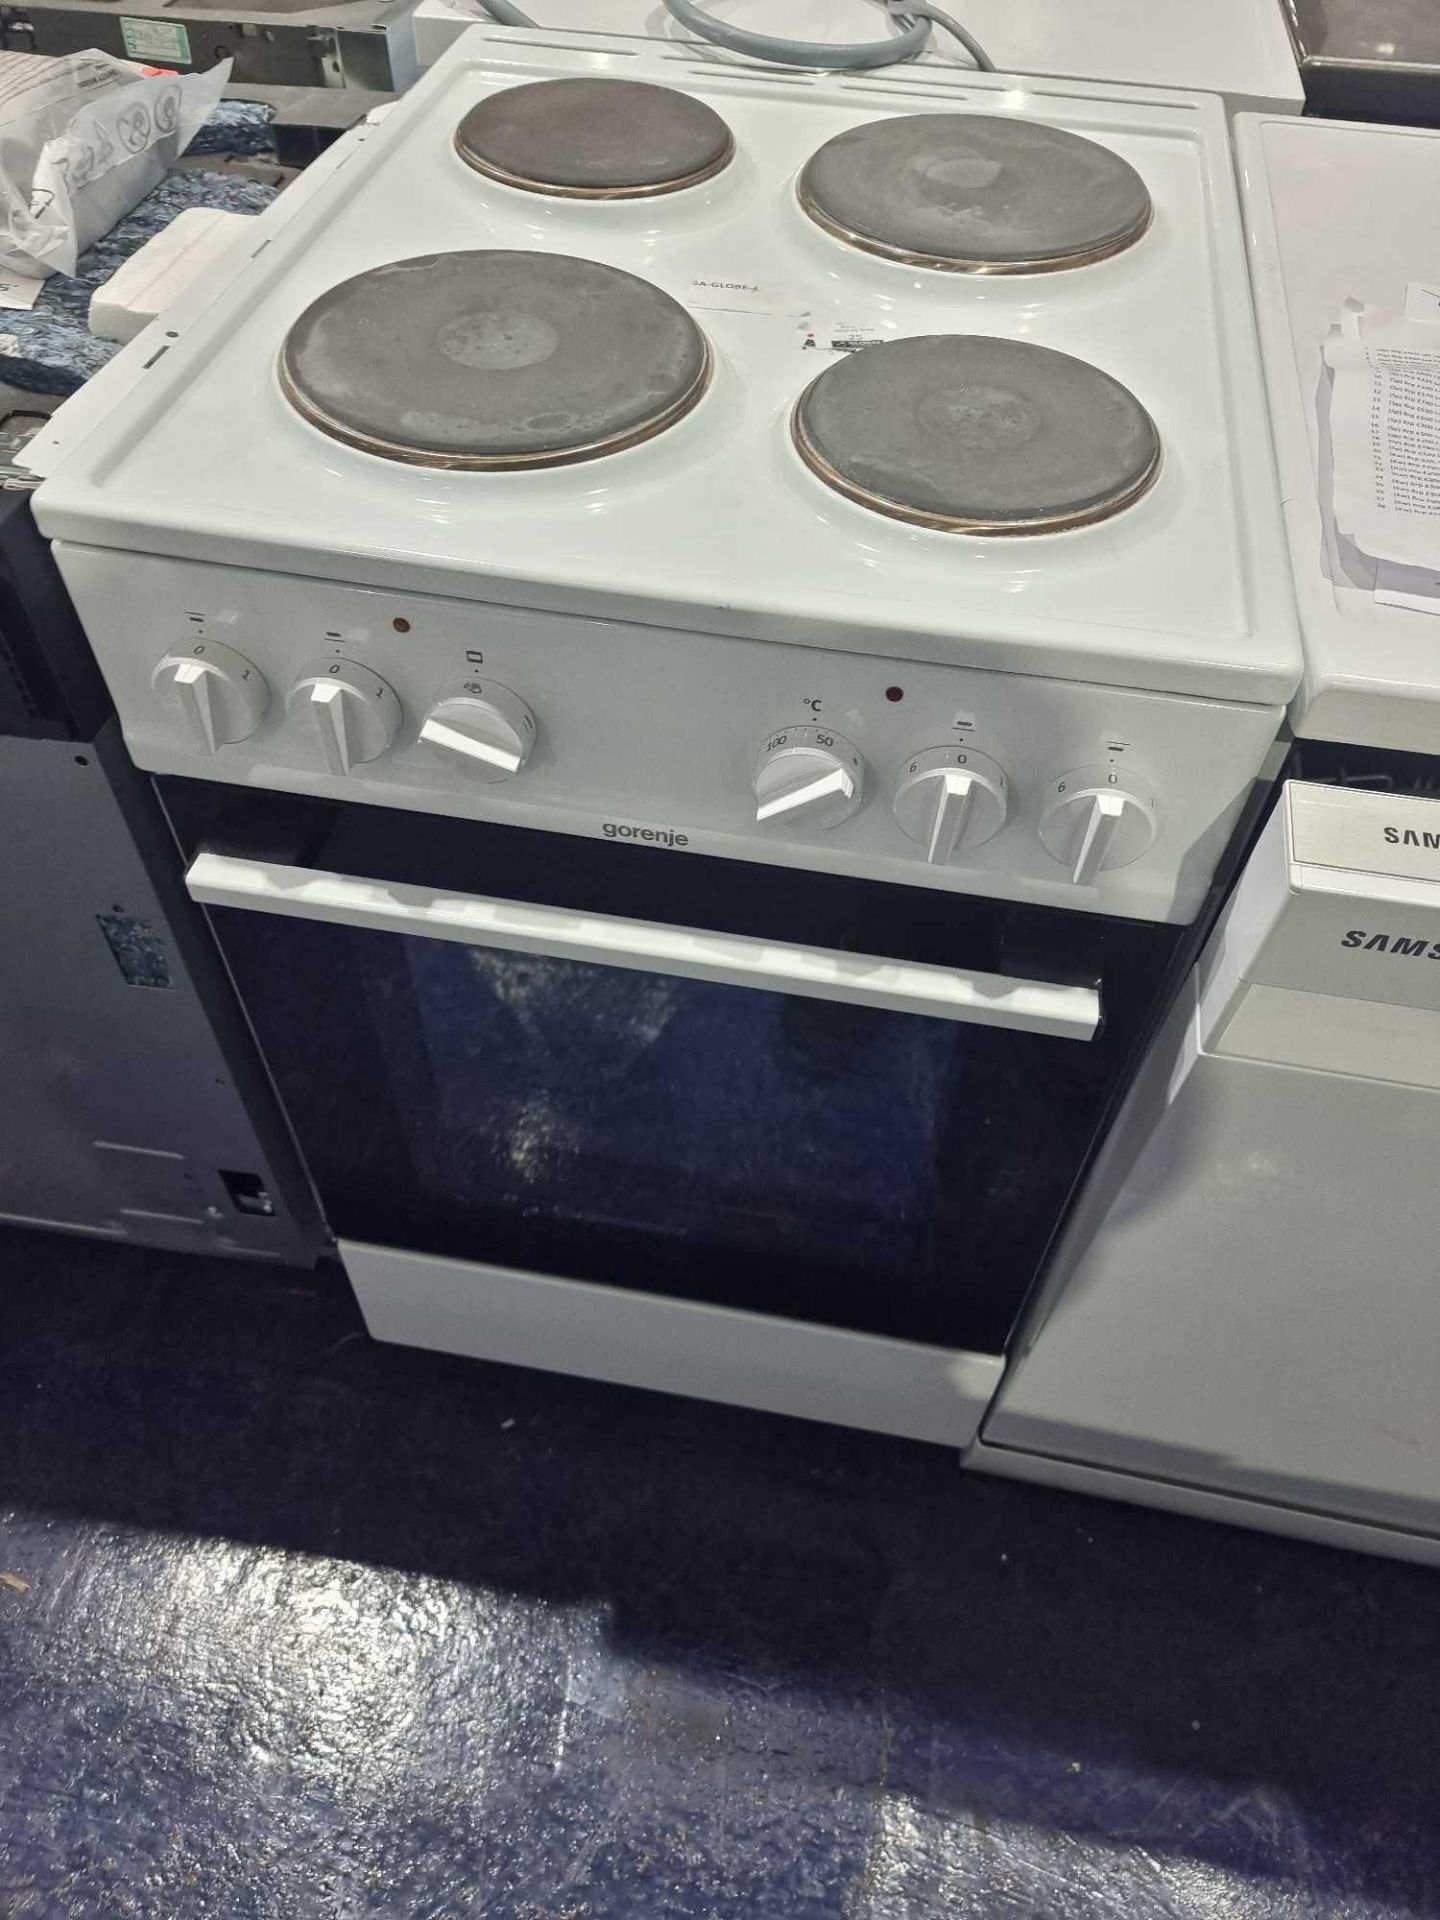 (Kw) RRP £300, Lot To Contain X1 Gorenje E5111Wg Electric Cooker, Unboxed - Image 4 of 4